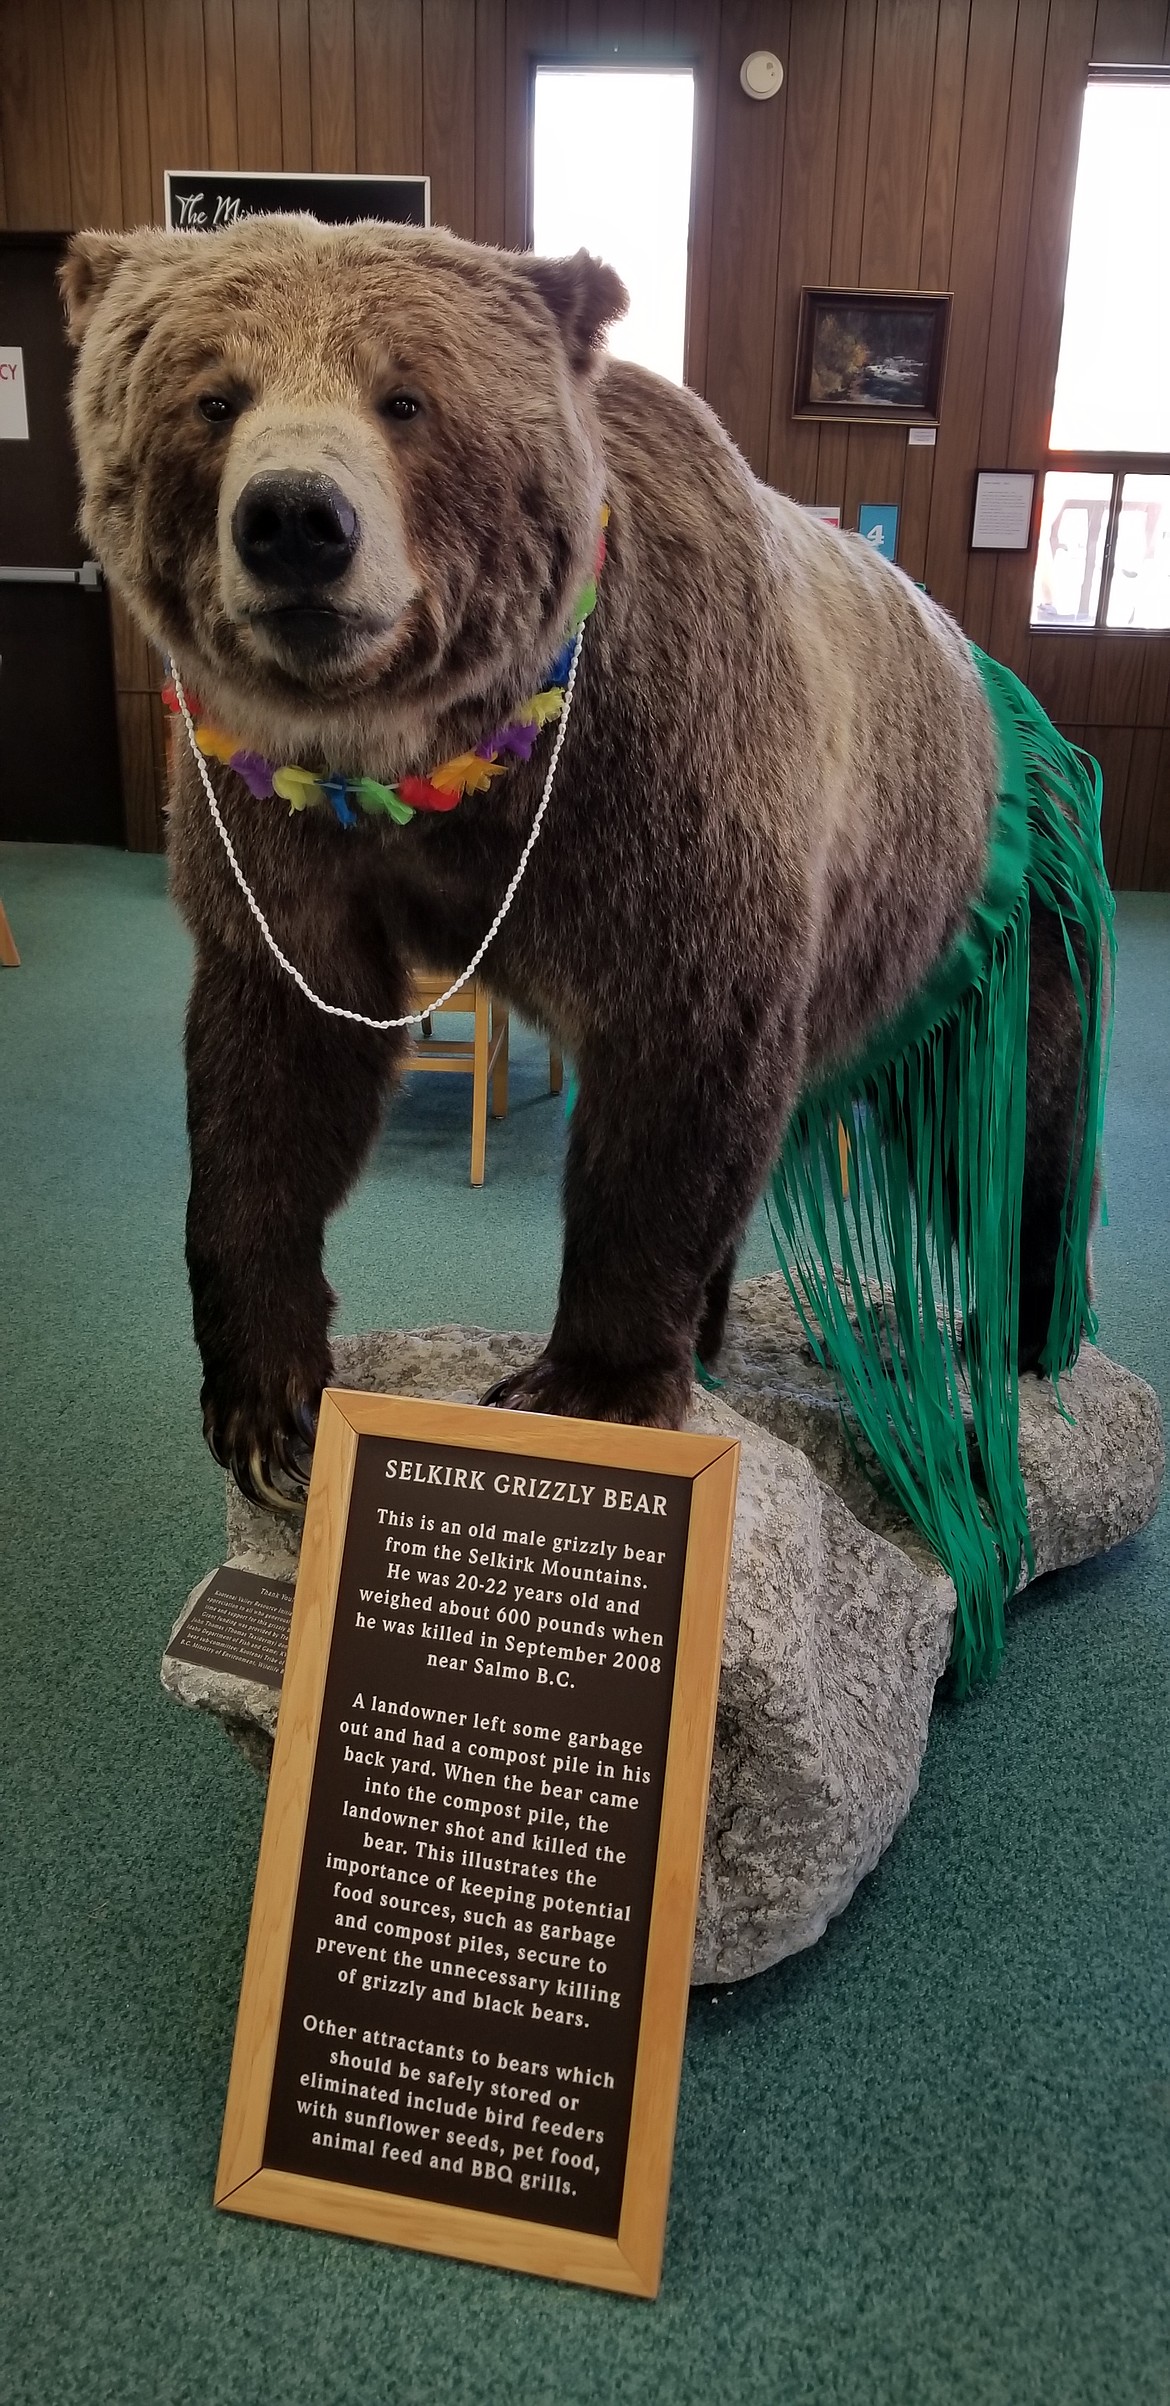 Photo by MANDI BATEMAN
Even the grizzly bear at Boundary County Library was ready to hit the beach.